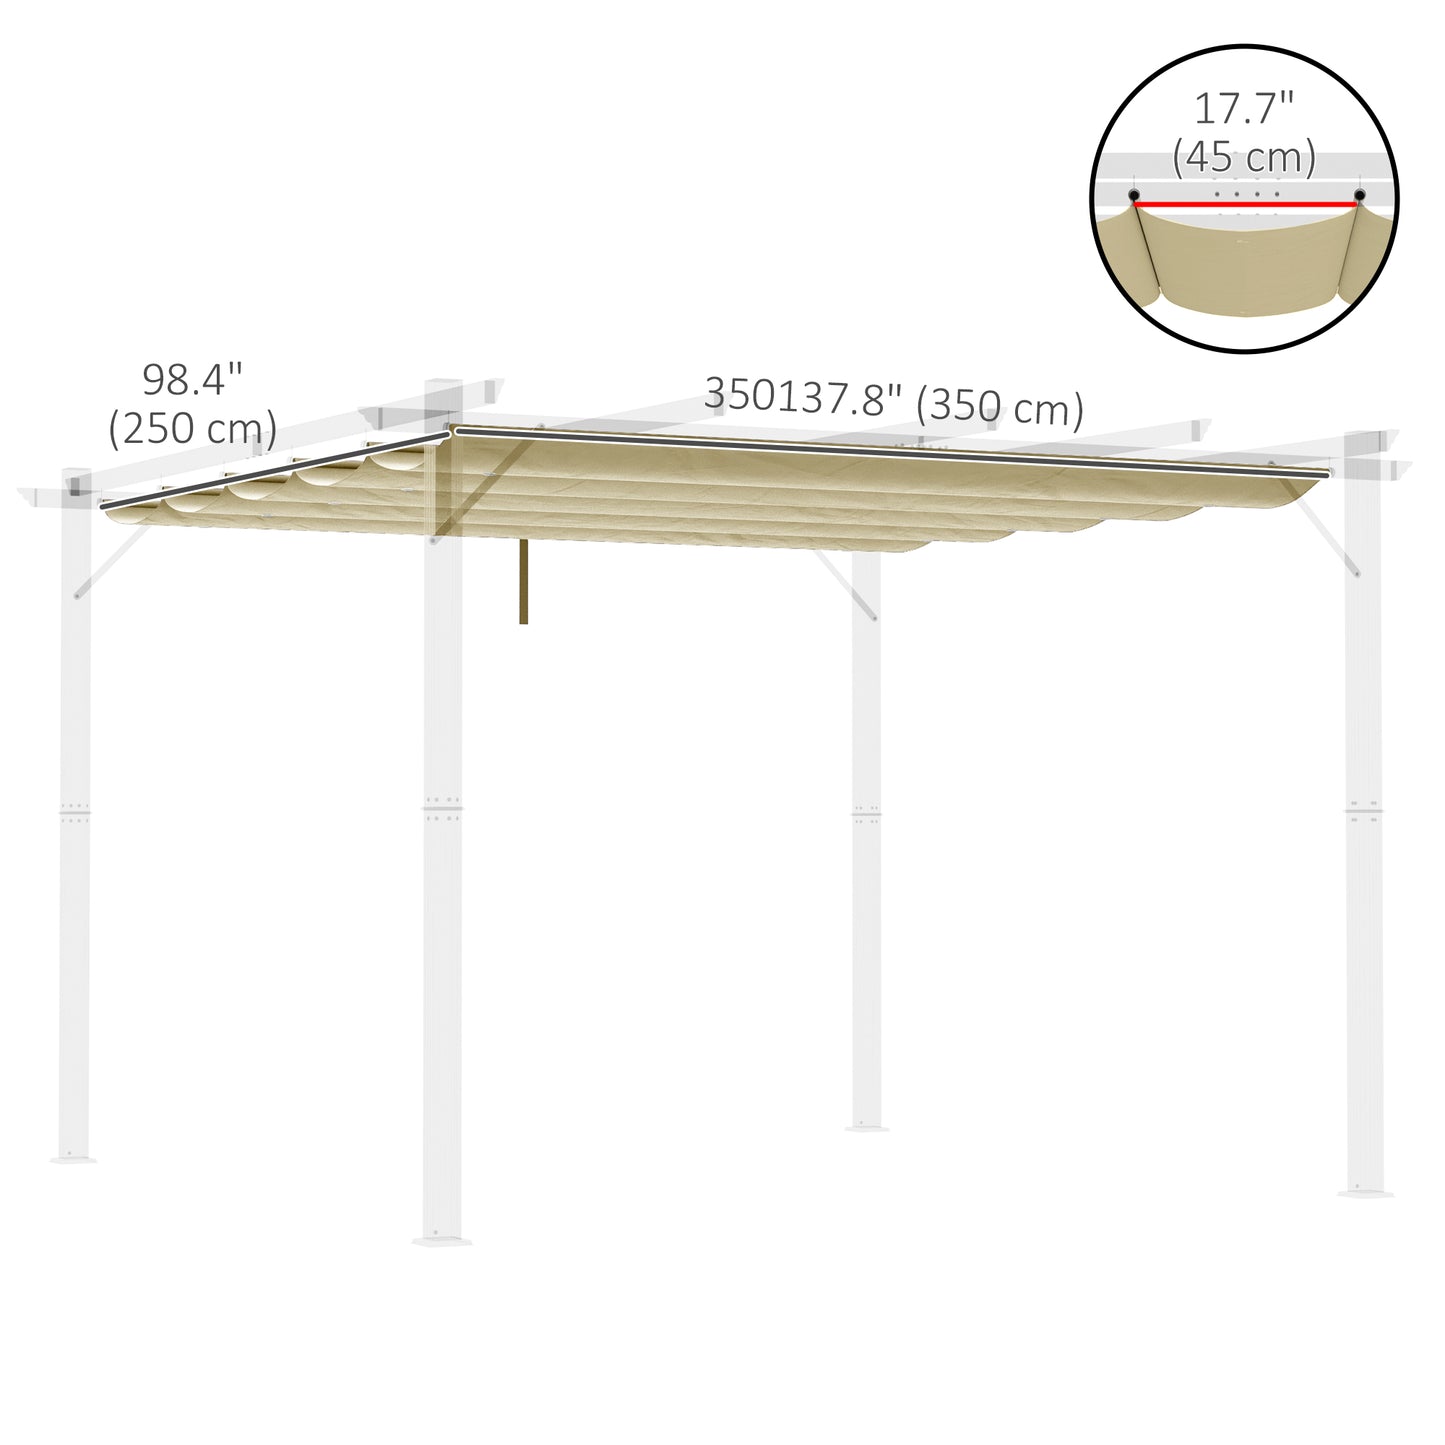 Retractable Pergola Canopy Cover Replacement for 9.8' x 13.1' Pergola, Beige at Gallery Canada